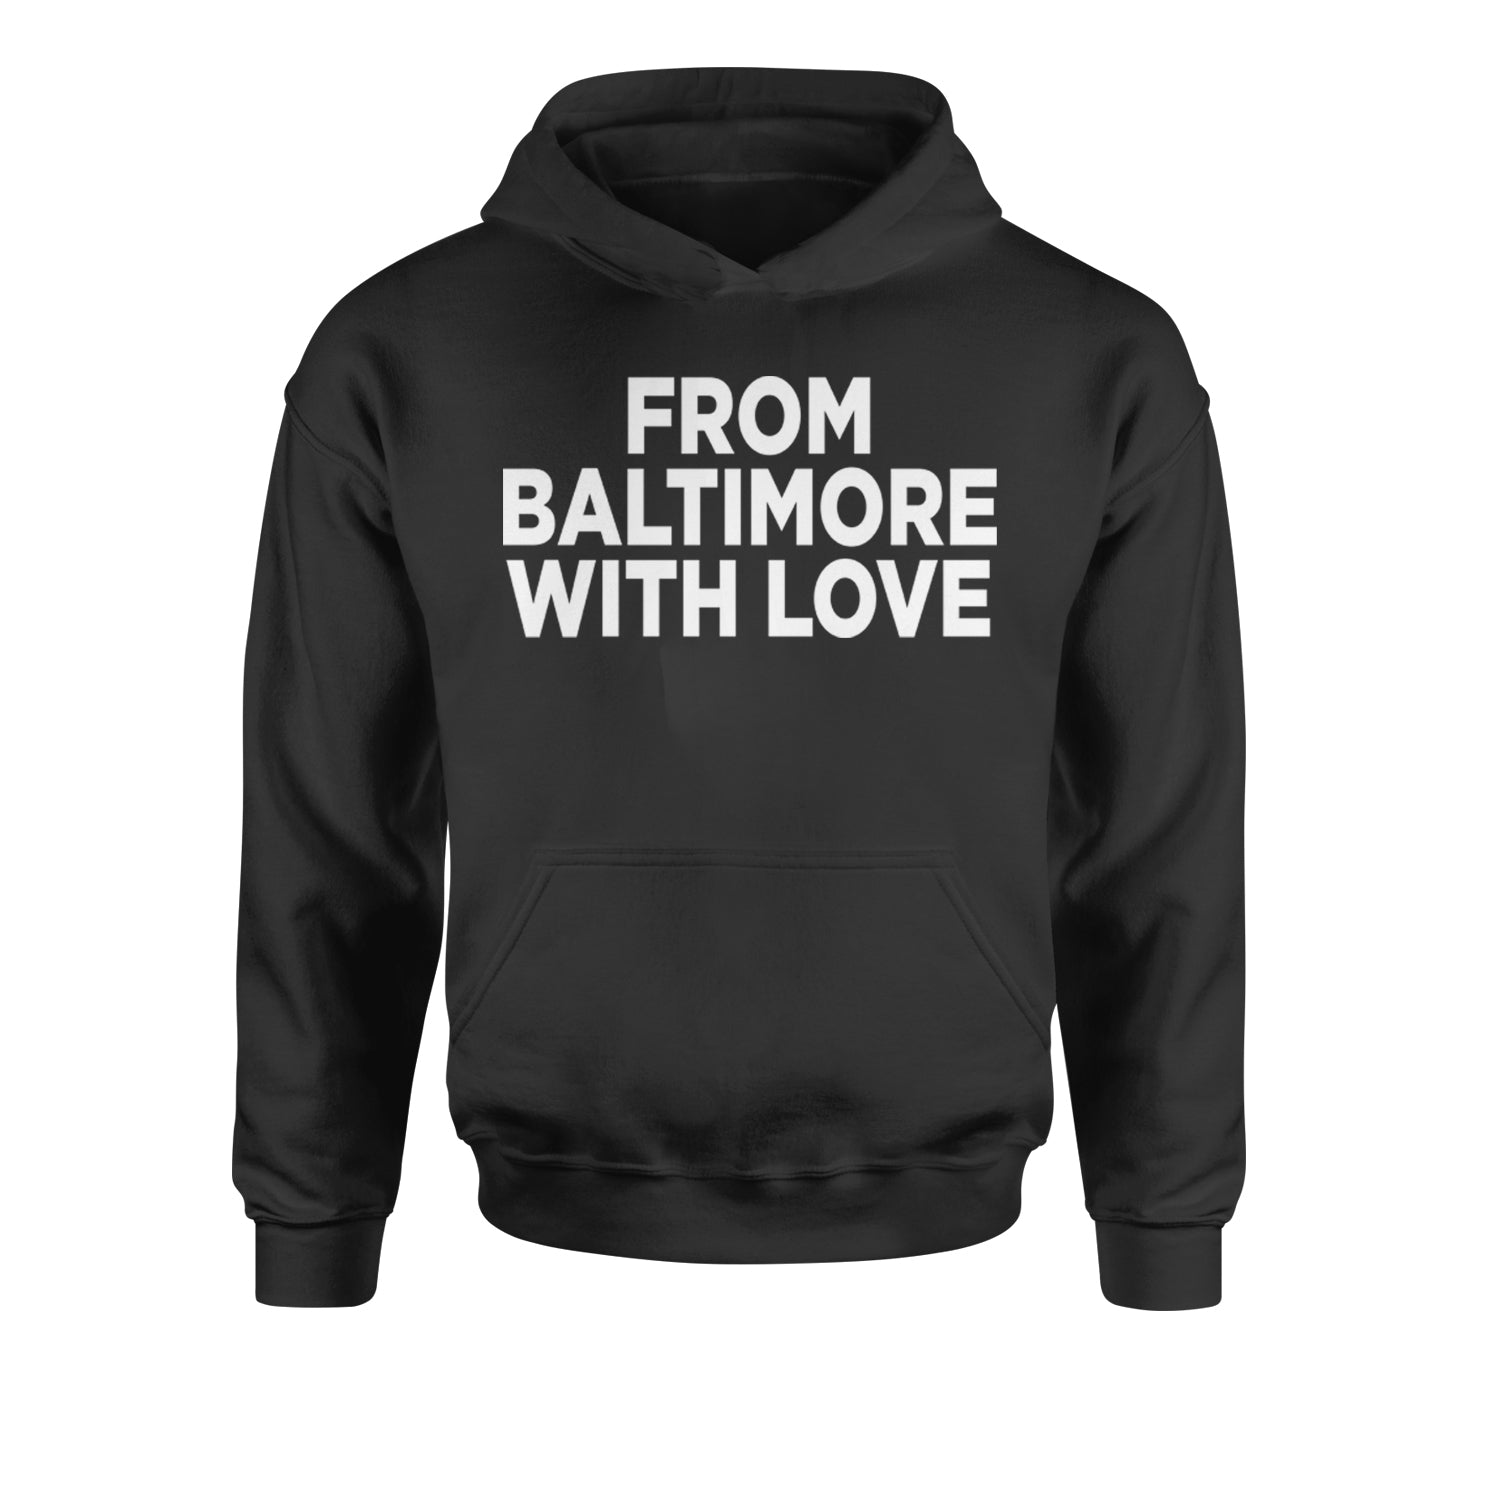 From Baltimore With Love Youth-Sized Hoodie